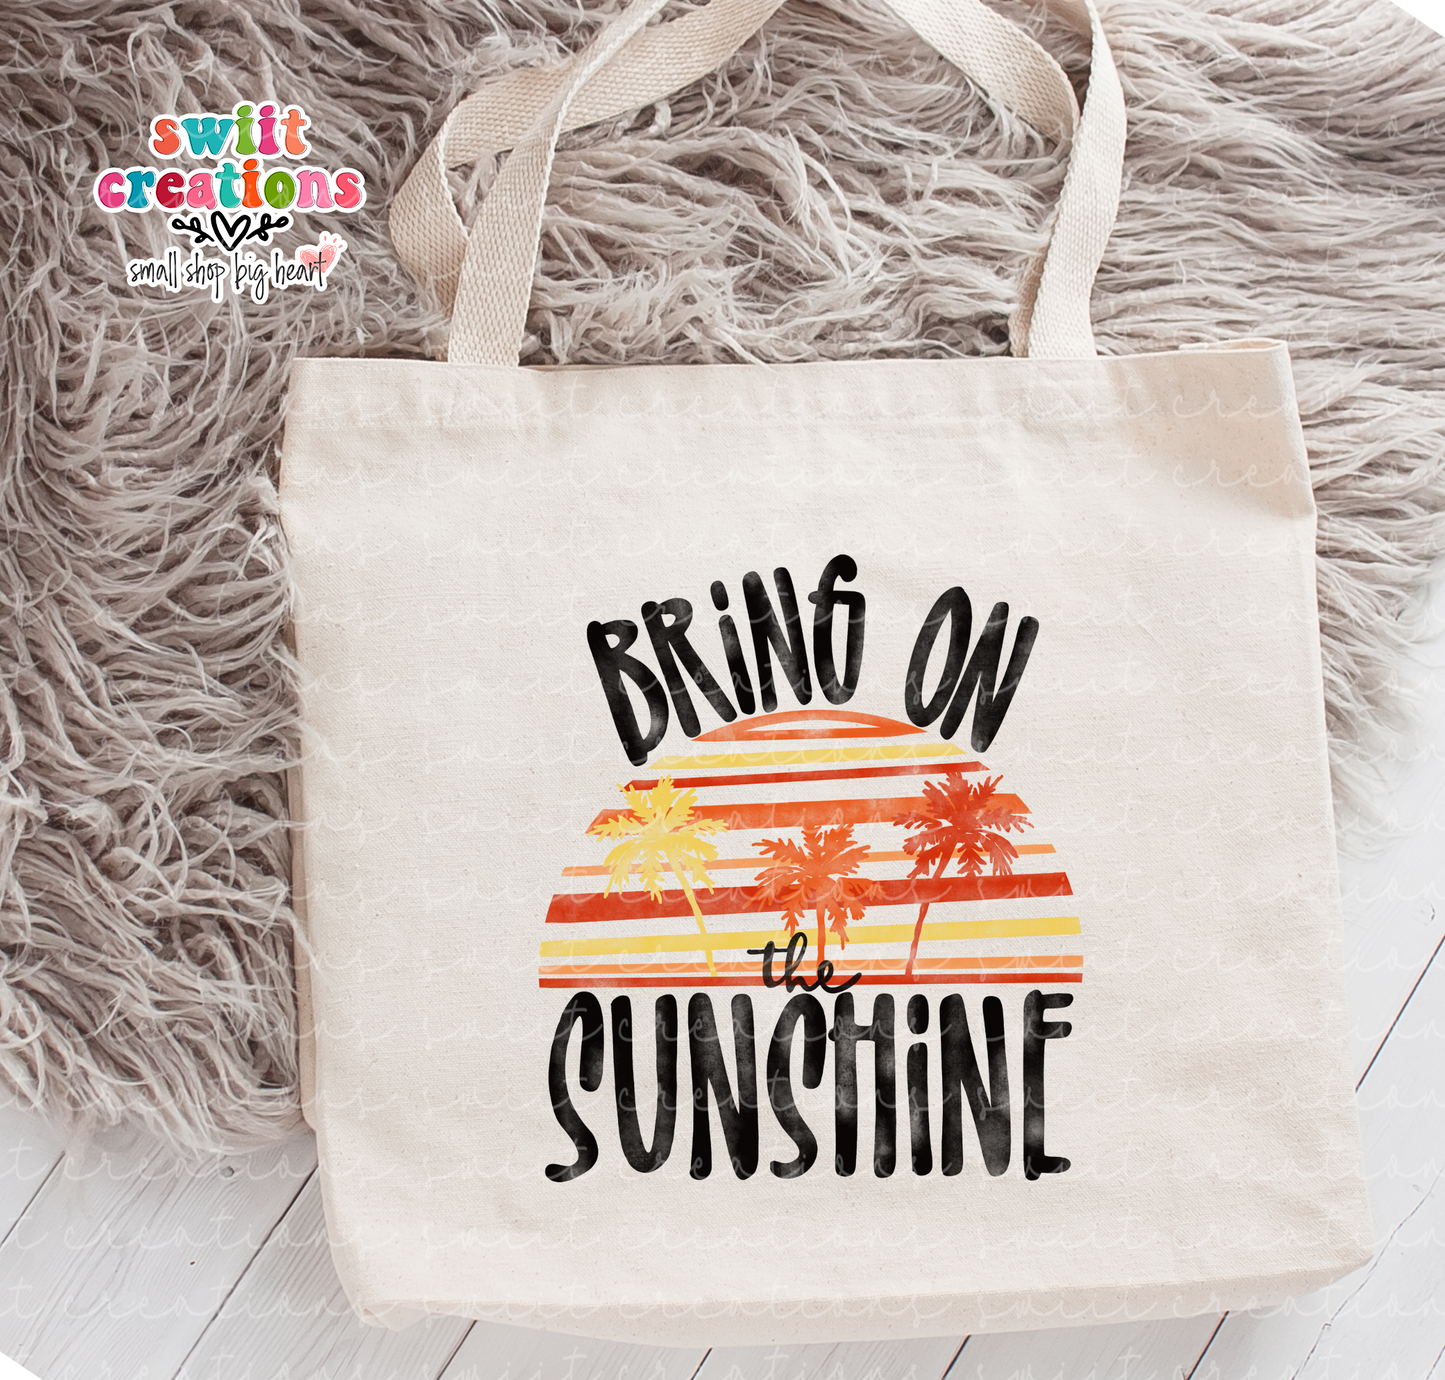 Bring On the Sunshine Large Linen Tote